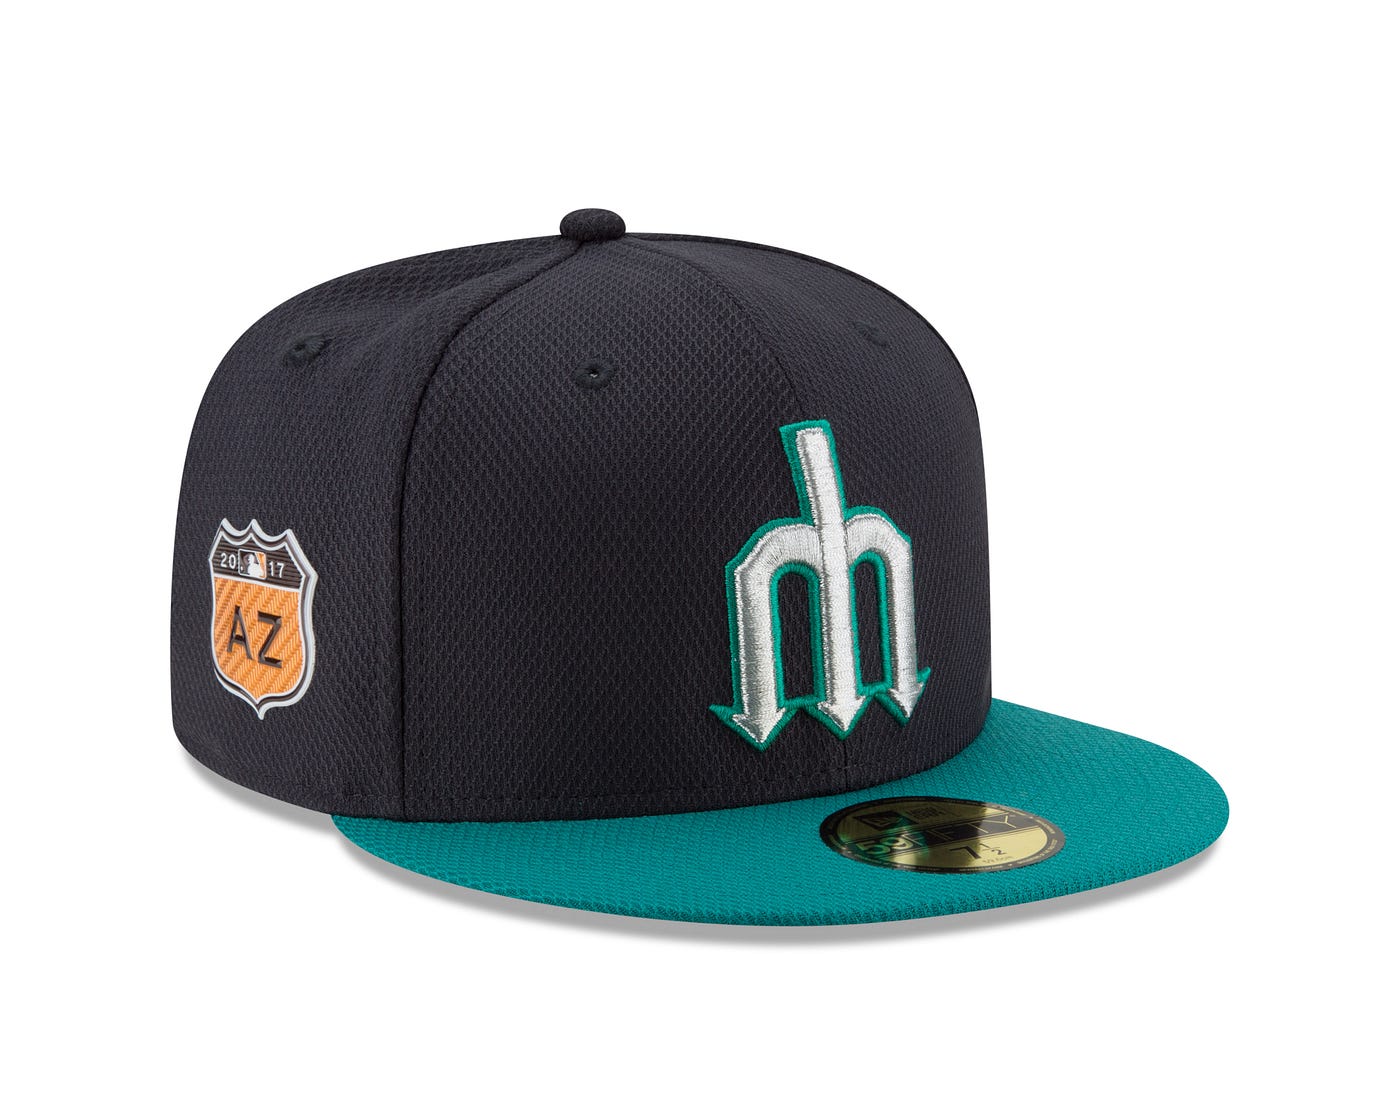 Mariners New Spring Training Cap. The Mariners are one of seven MLB teams…, by Mariners PR